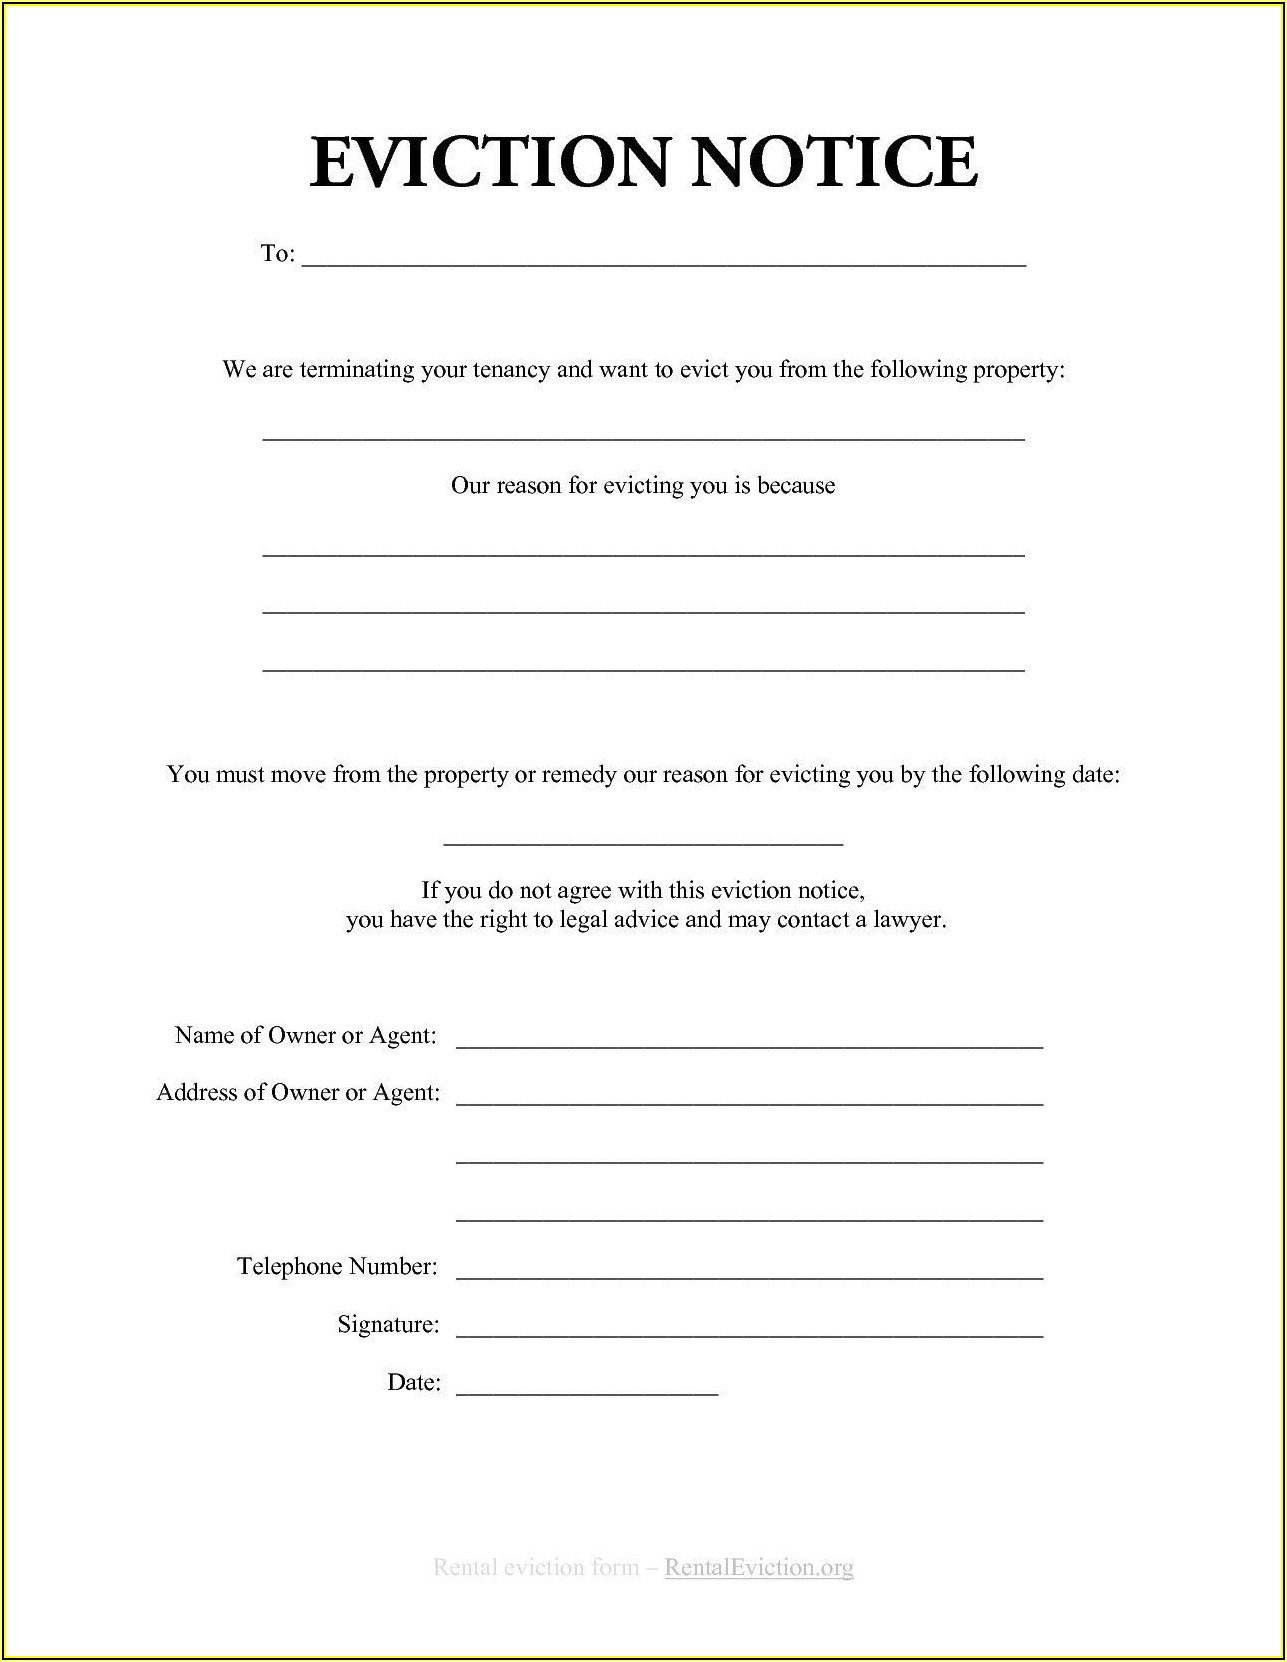 Eviction Notice Template Microsoft Word